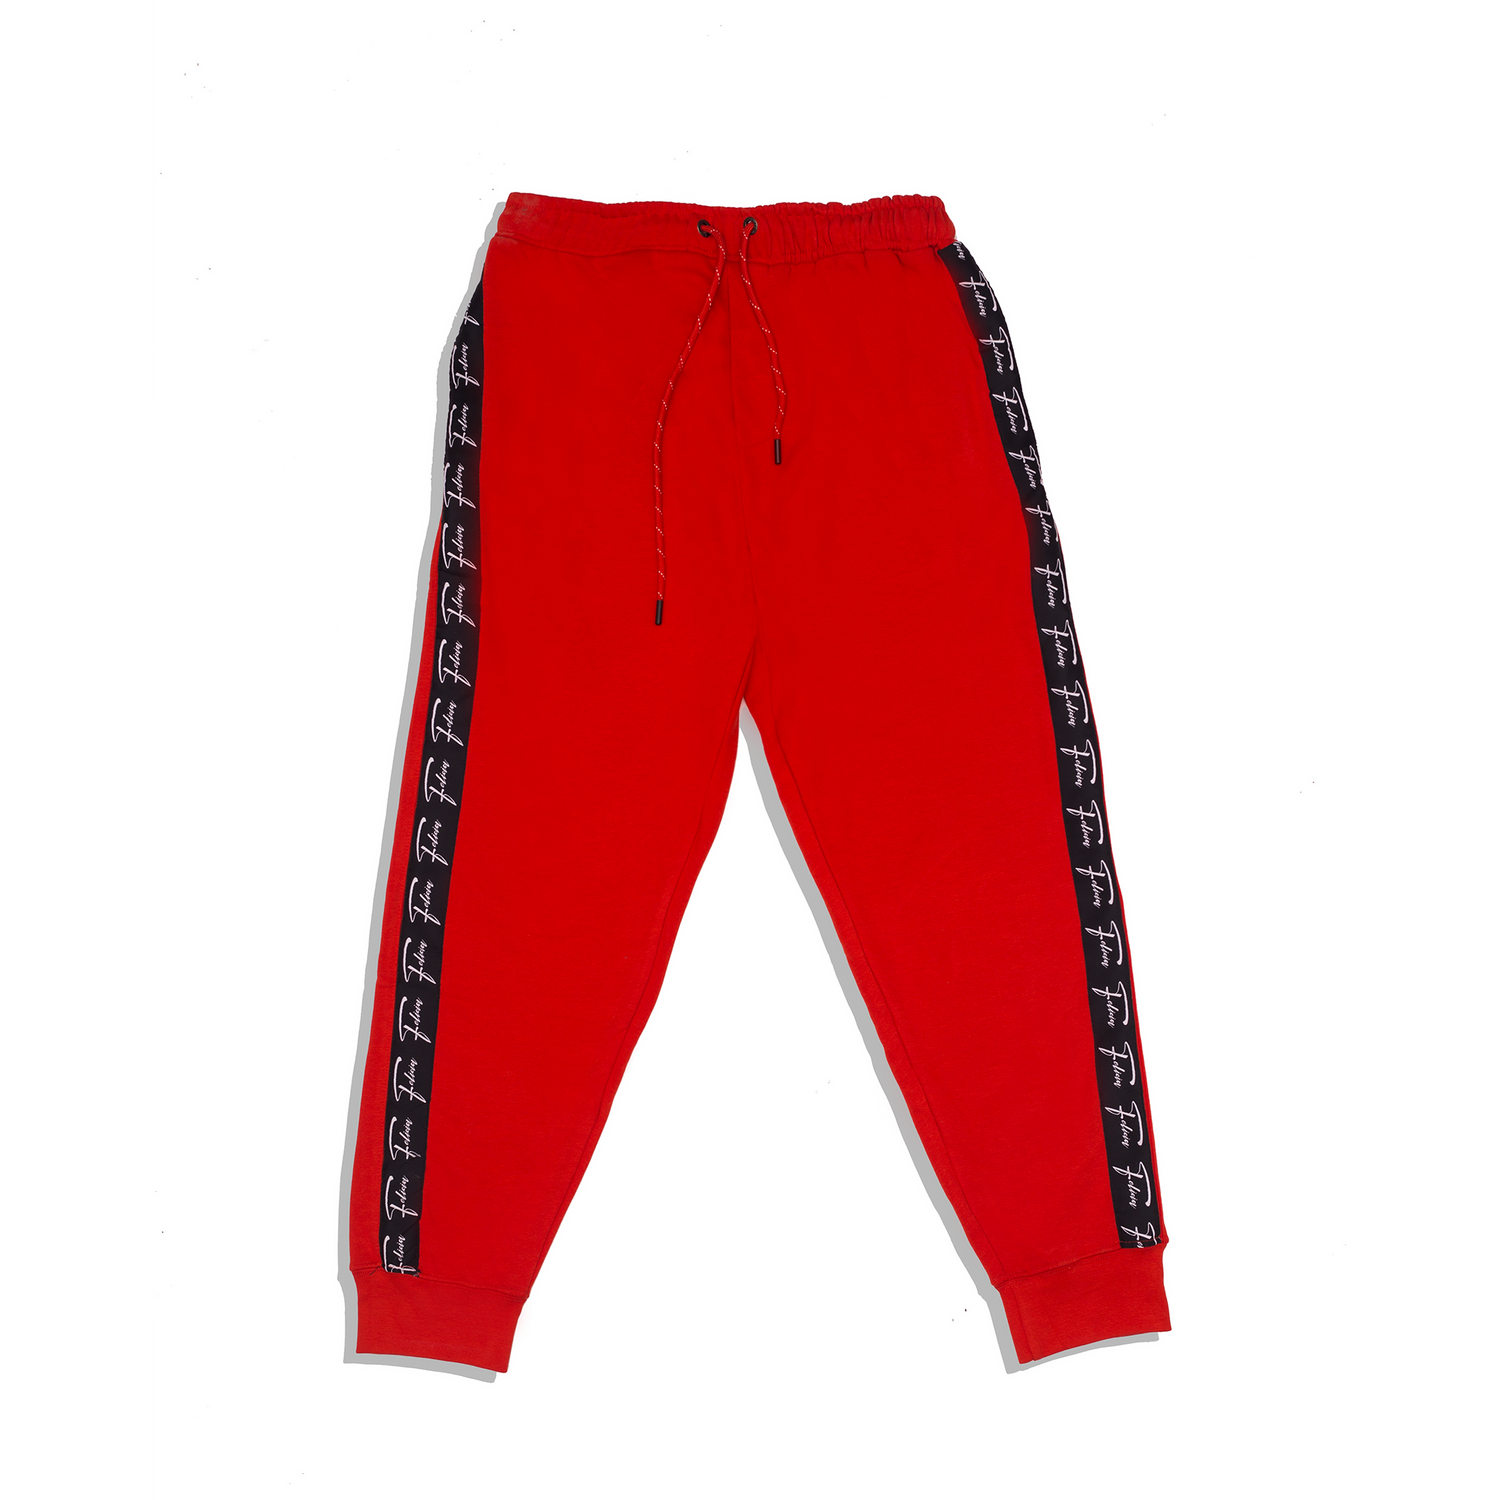 baggy red sweatpants